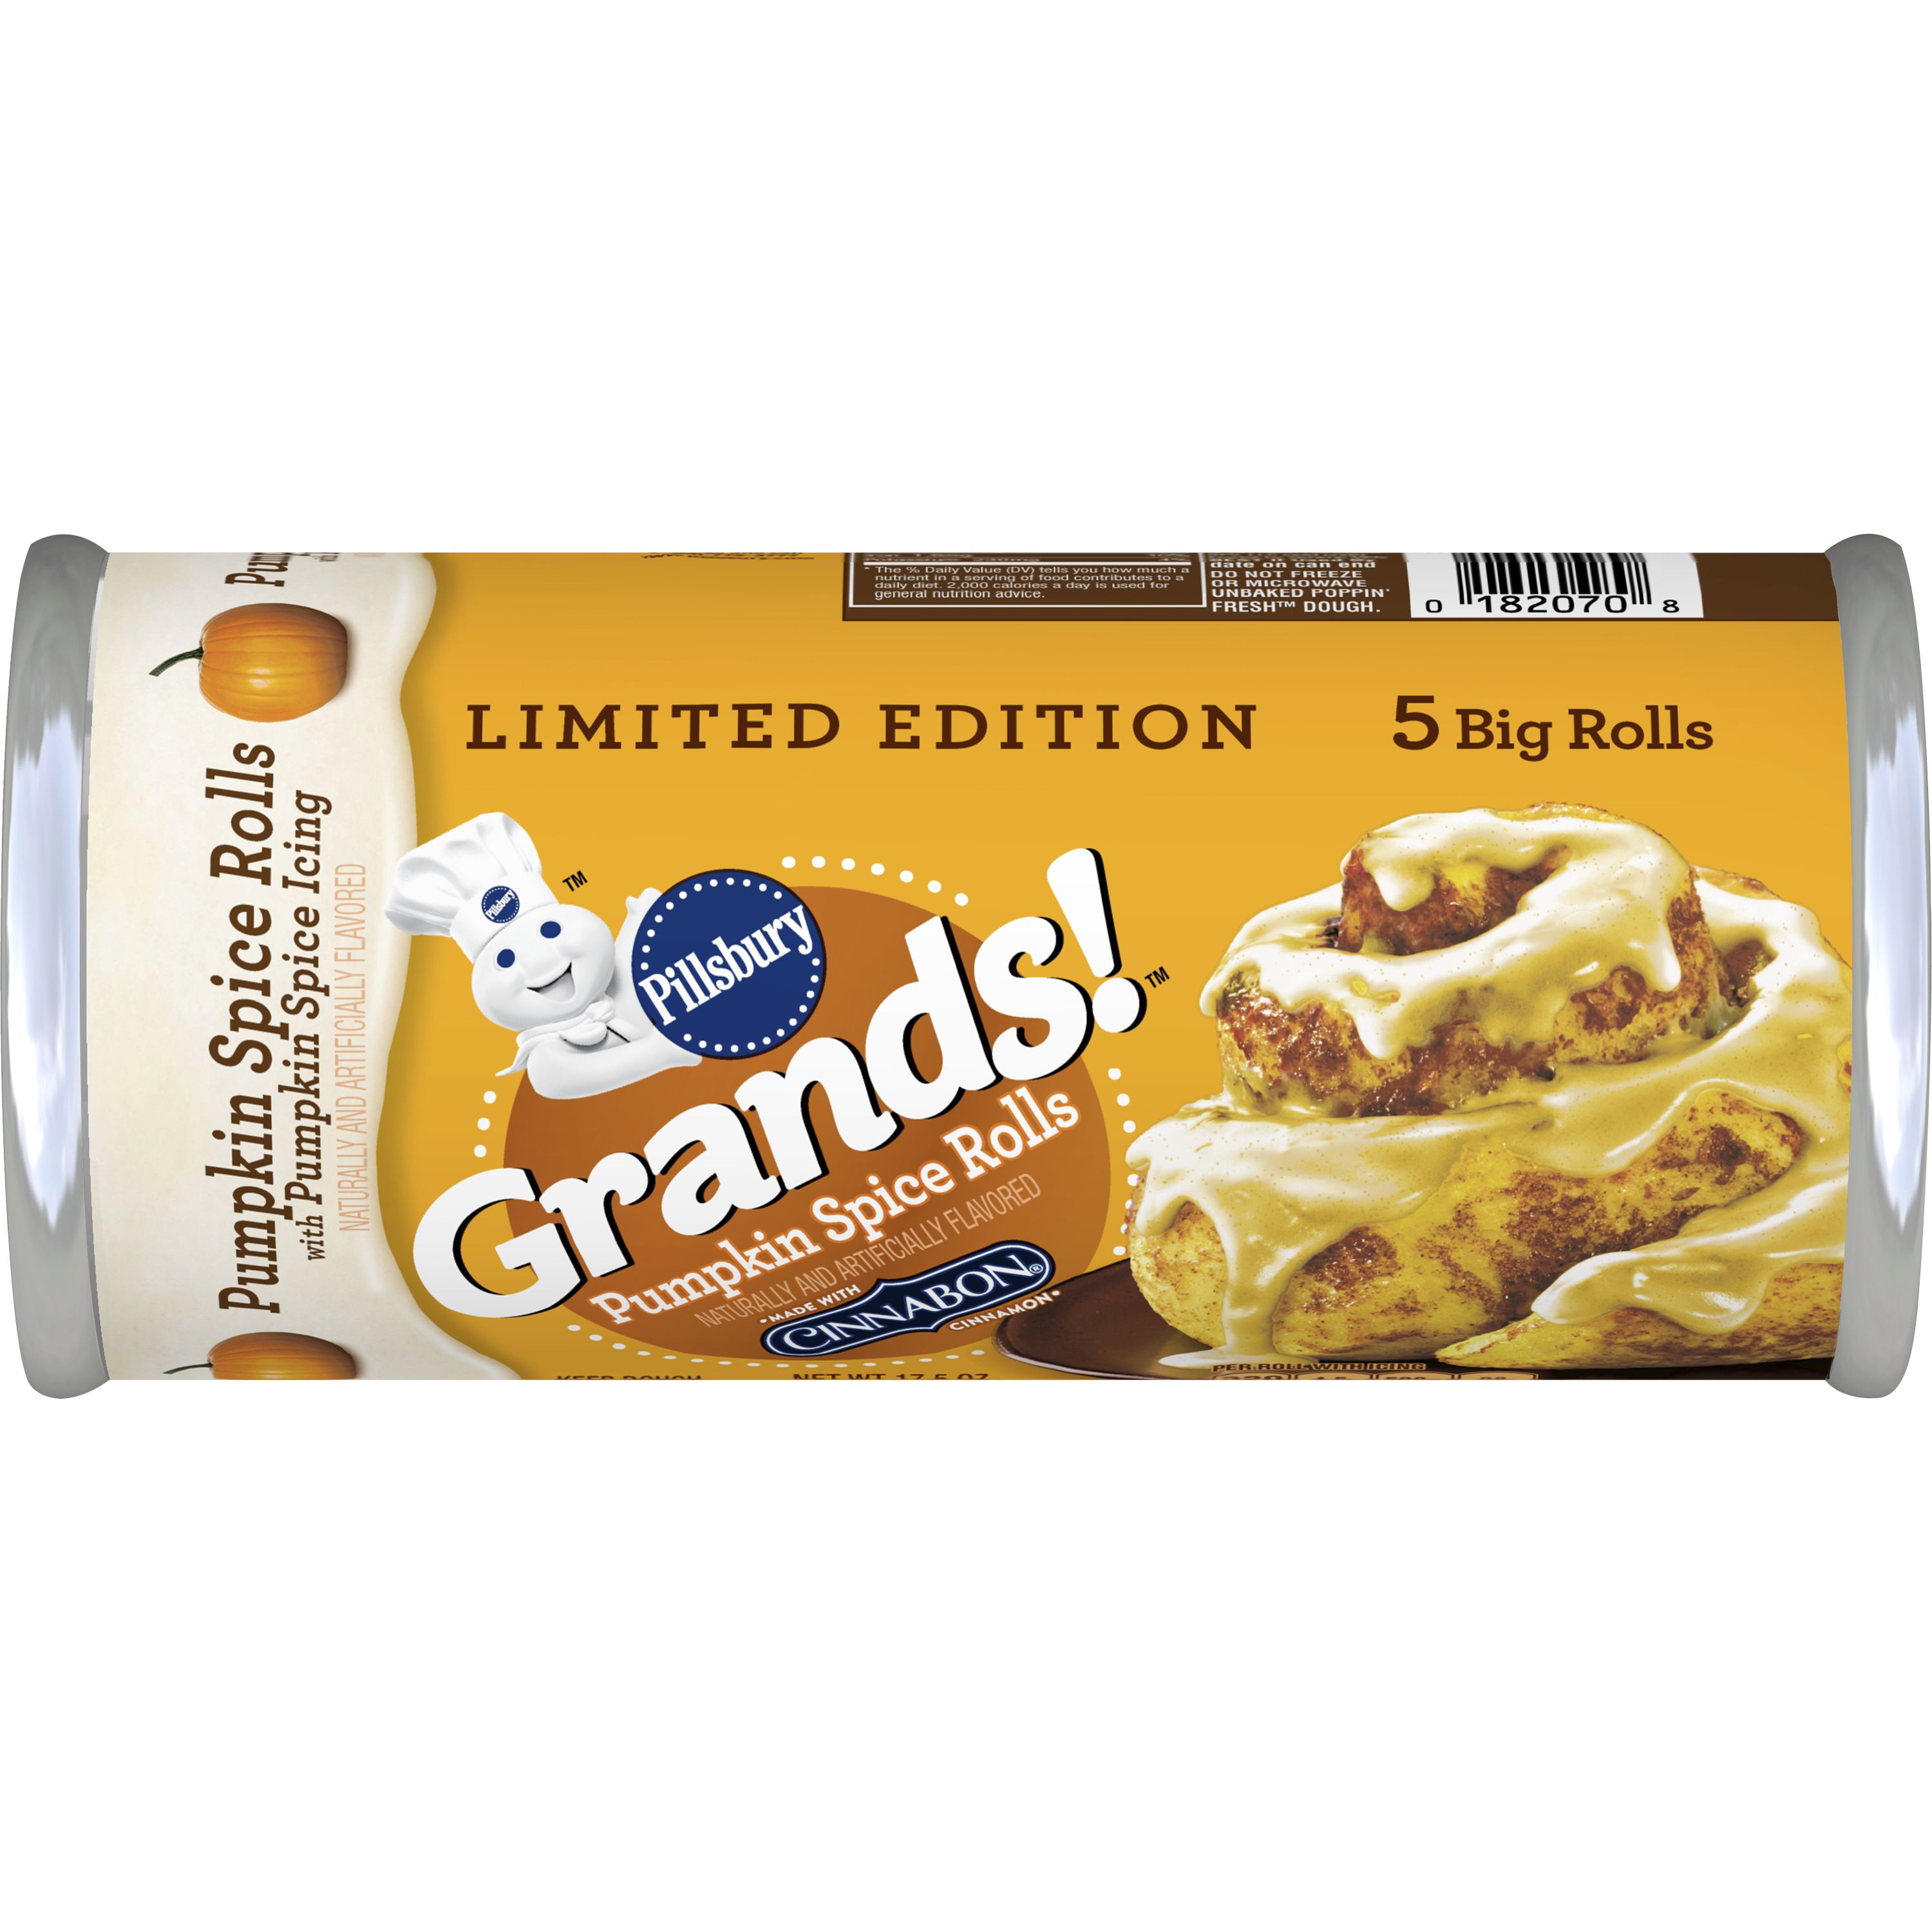 Limited Edition Pillsbury™ Grands!™ Pumpkin Spice Rolls with Pumpkin Spice Icing - Front